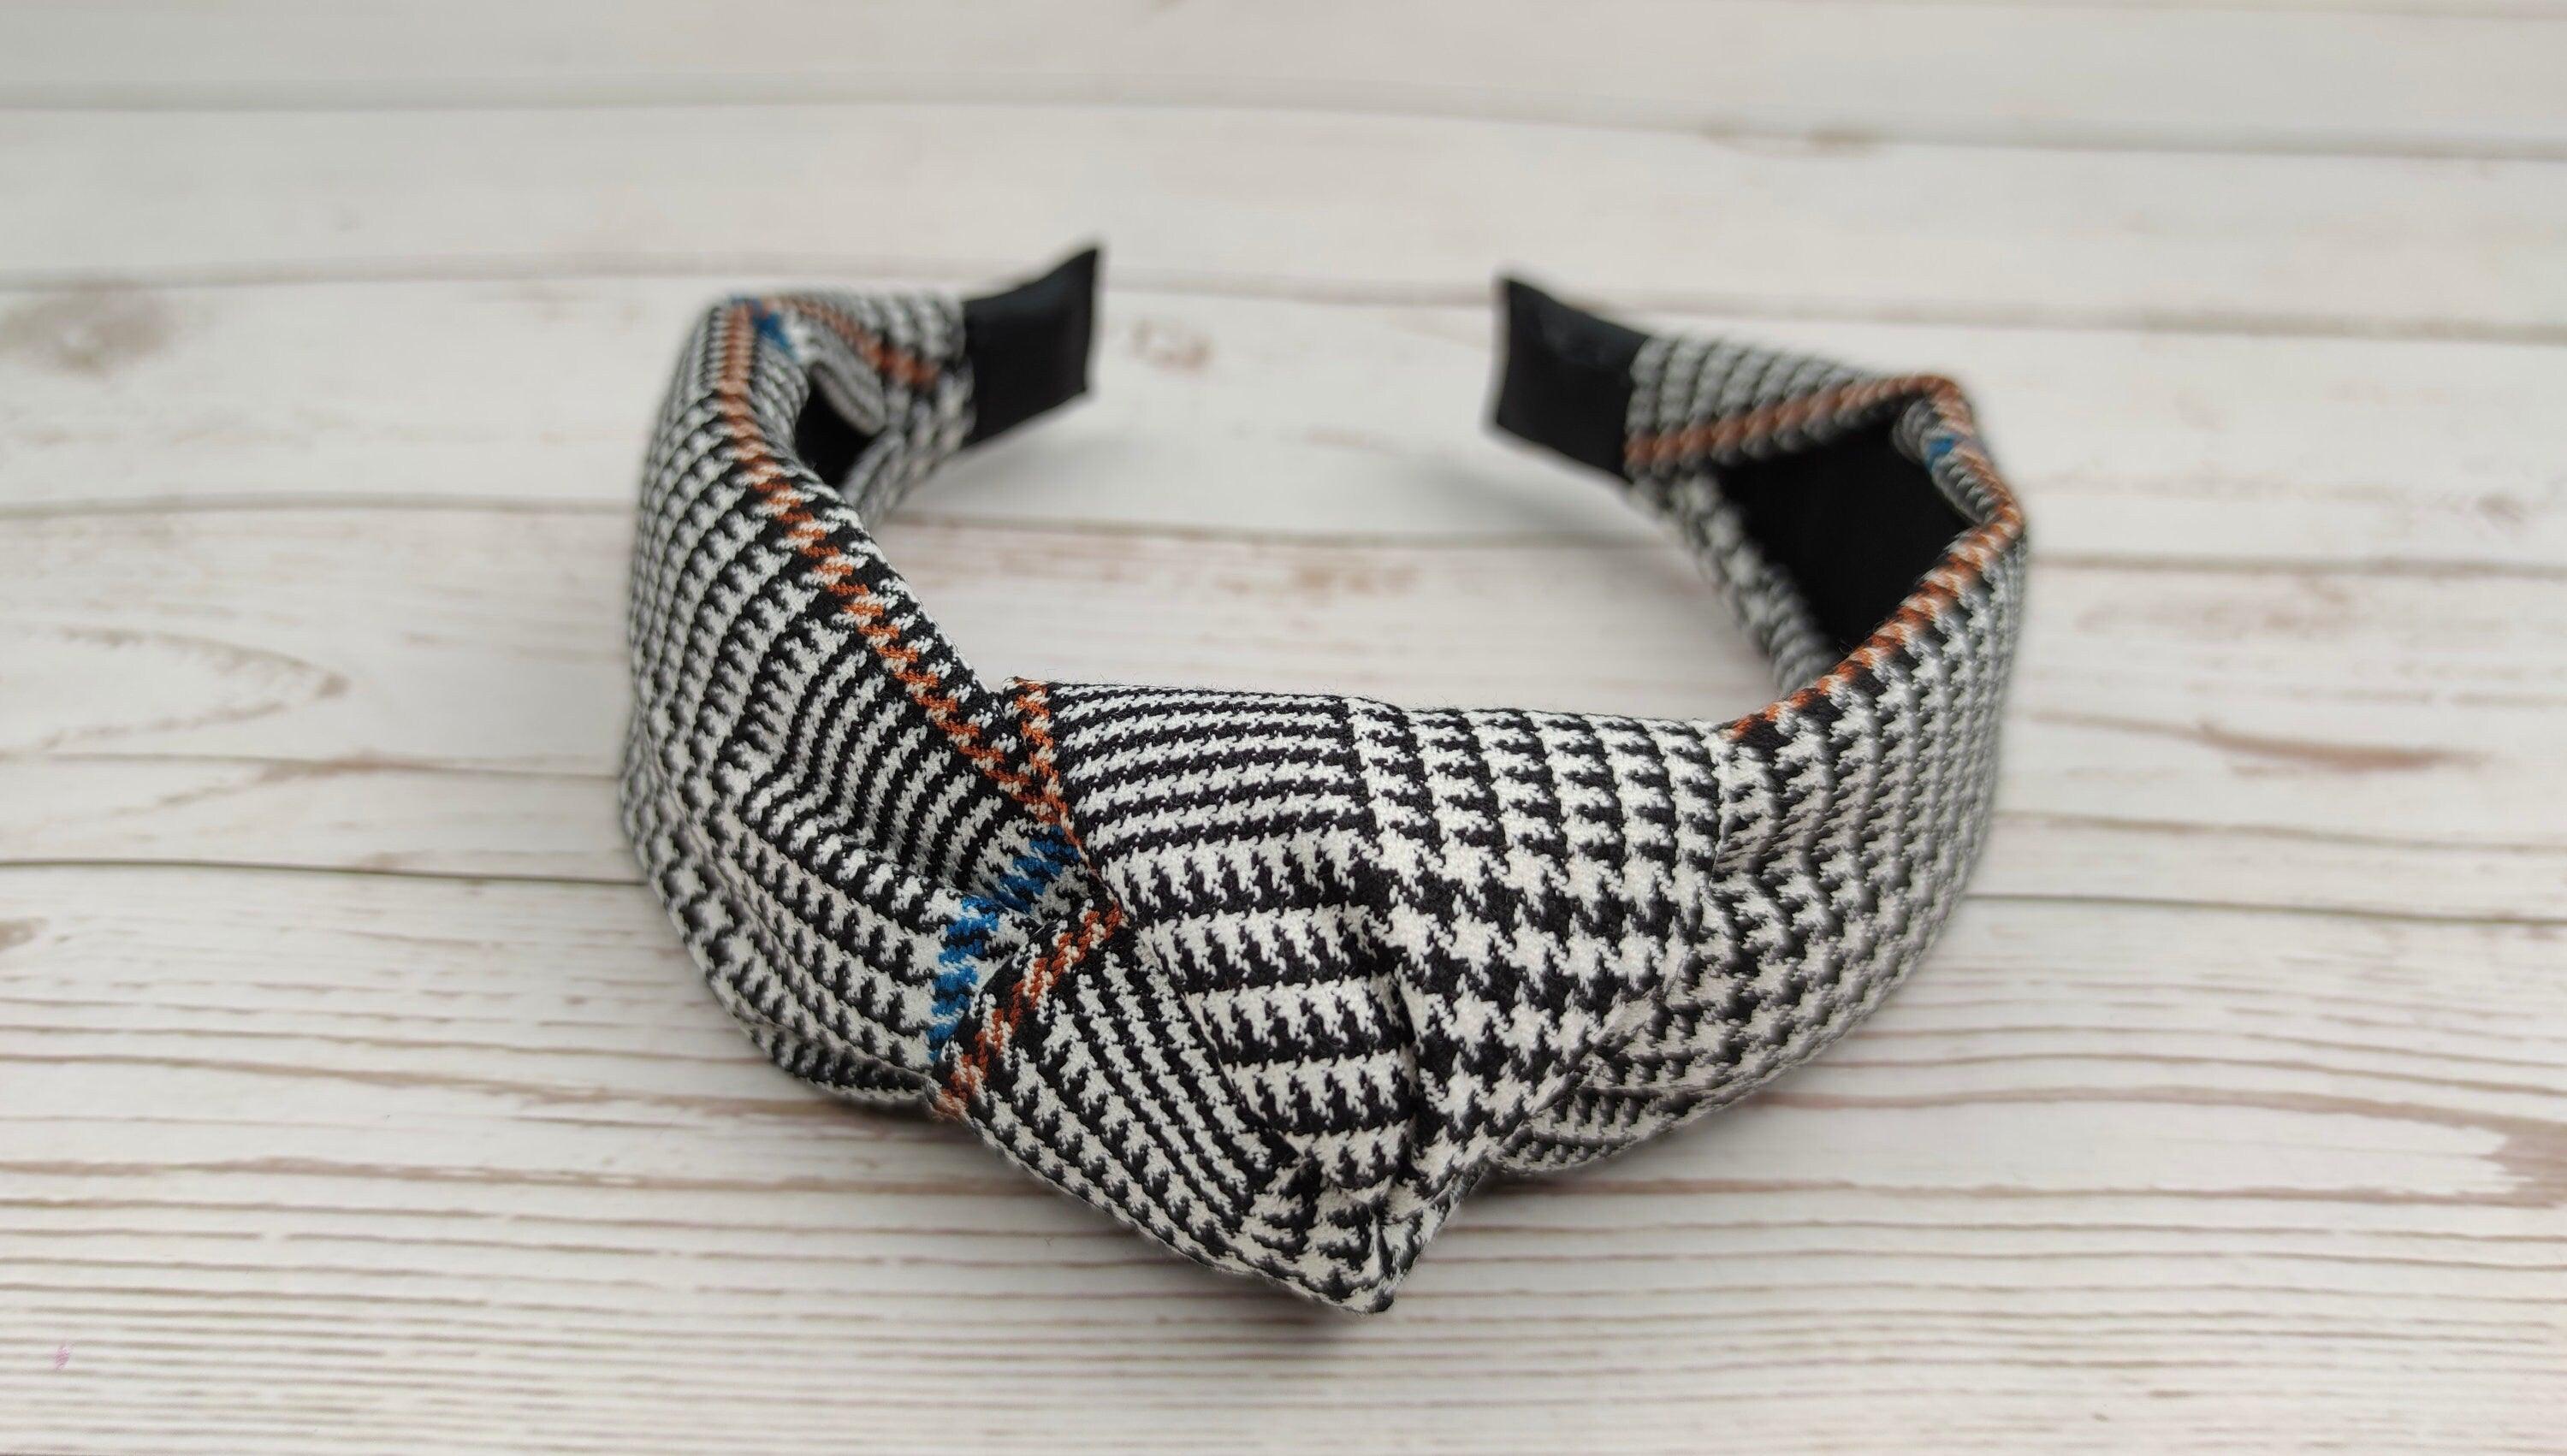 Delicate Classic Knotted Crepe Headband in White and Black, Perfect for College Fashion and Everyday Wear - Featuring Blue and Orange Stripes available at Moyoni Design